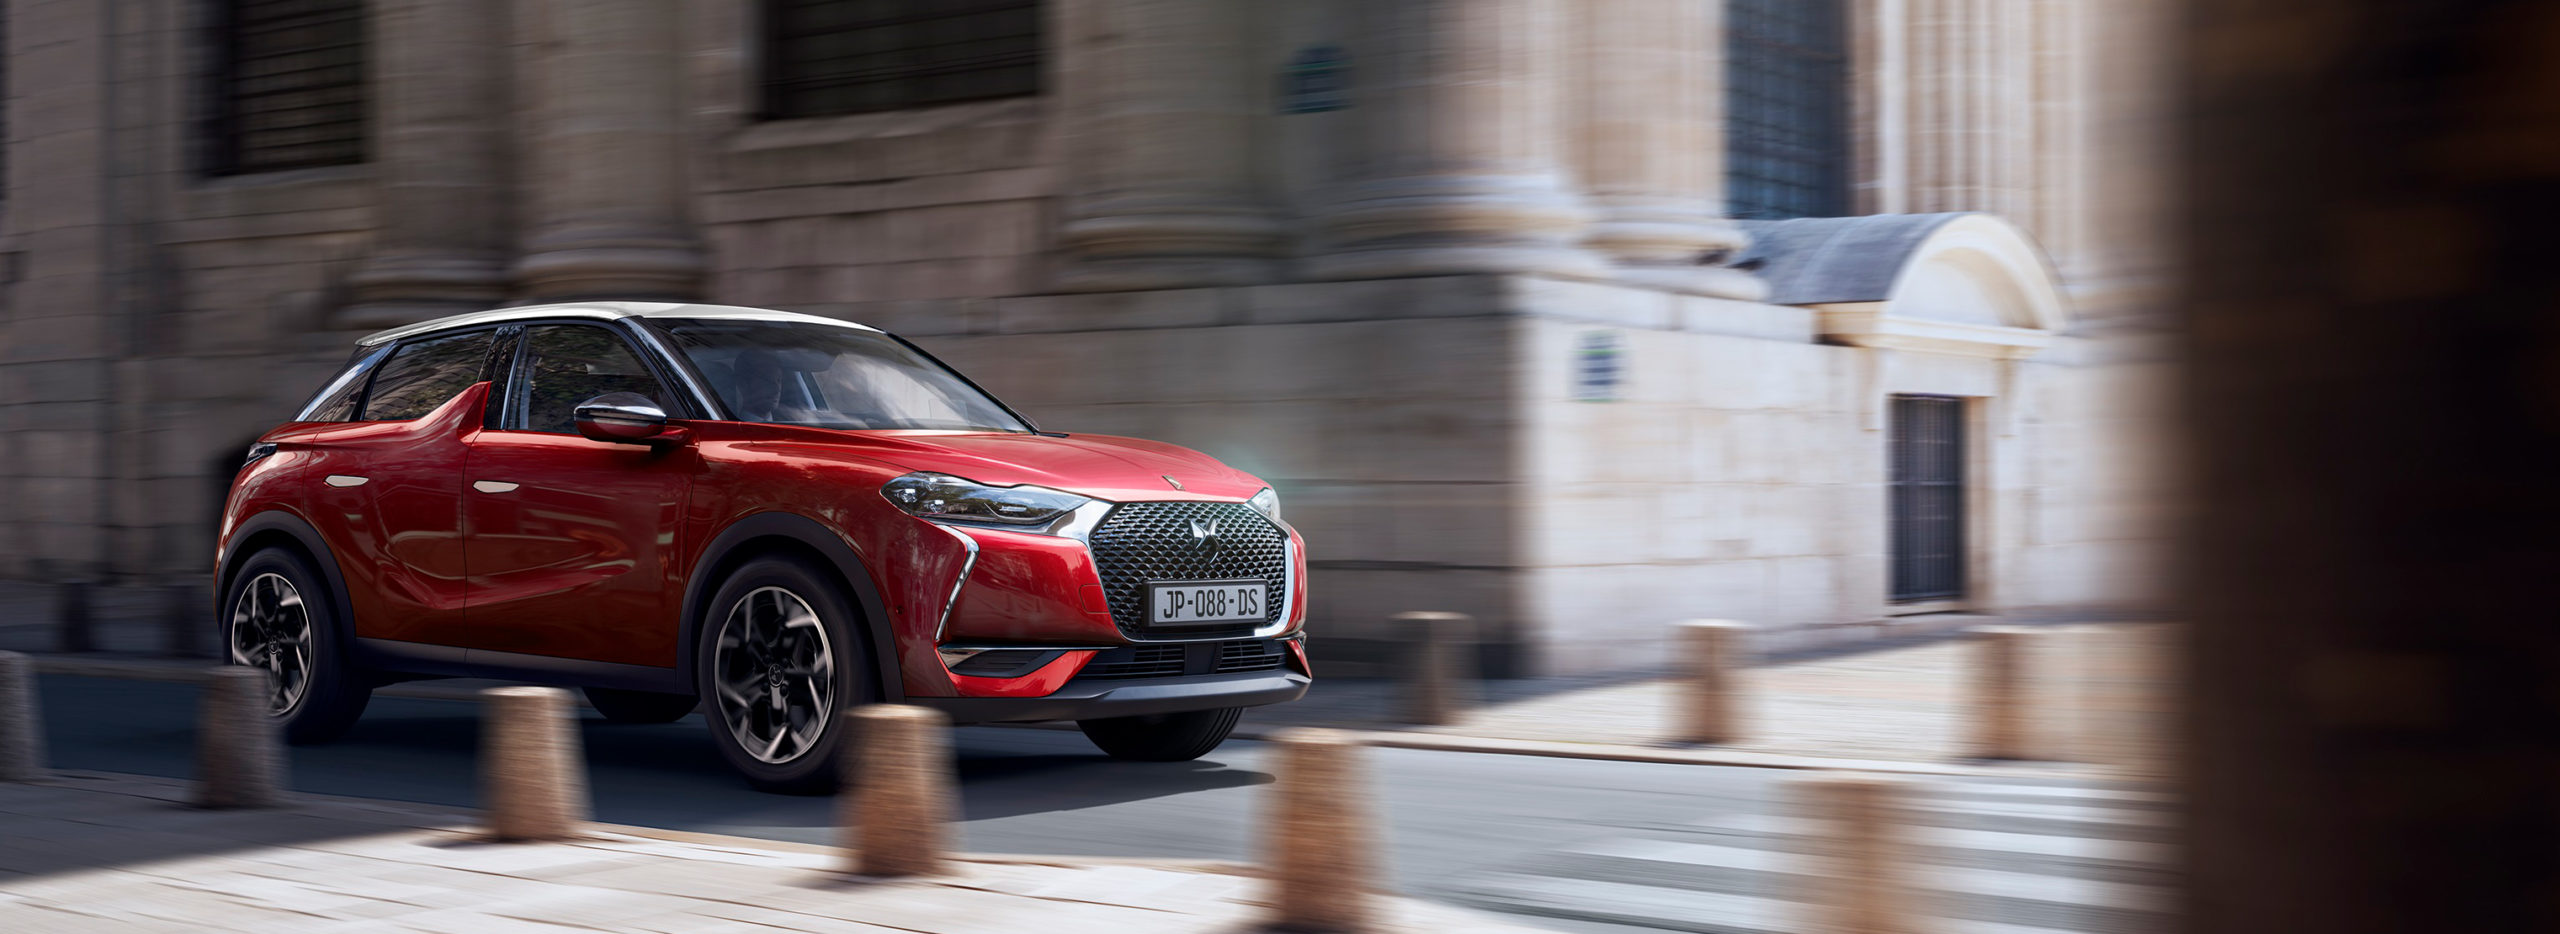 DS 3 Crossback Connected Chic Serie especial